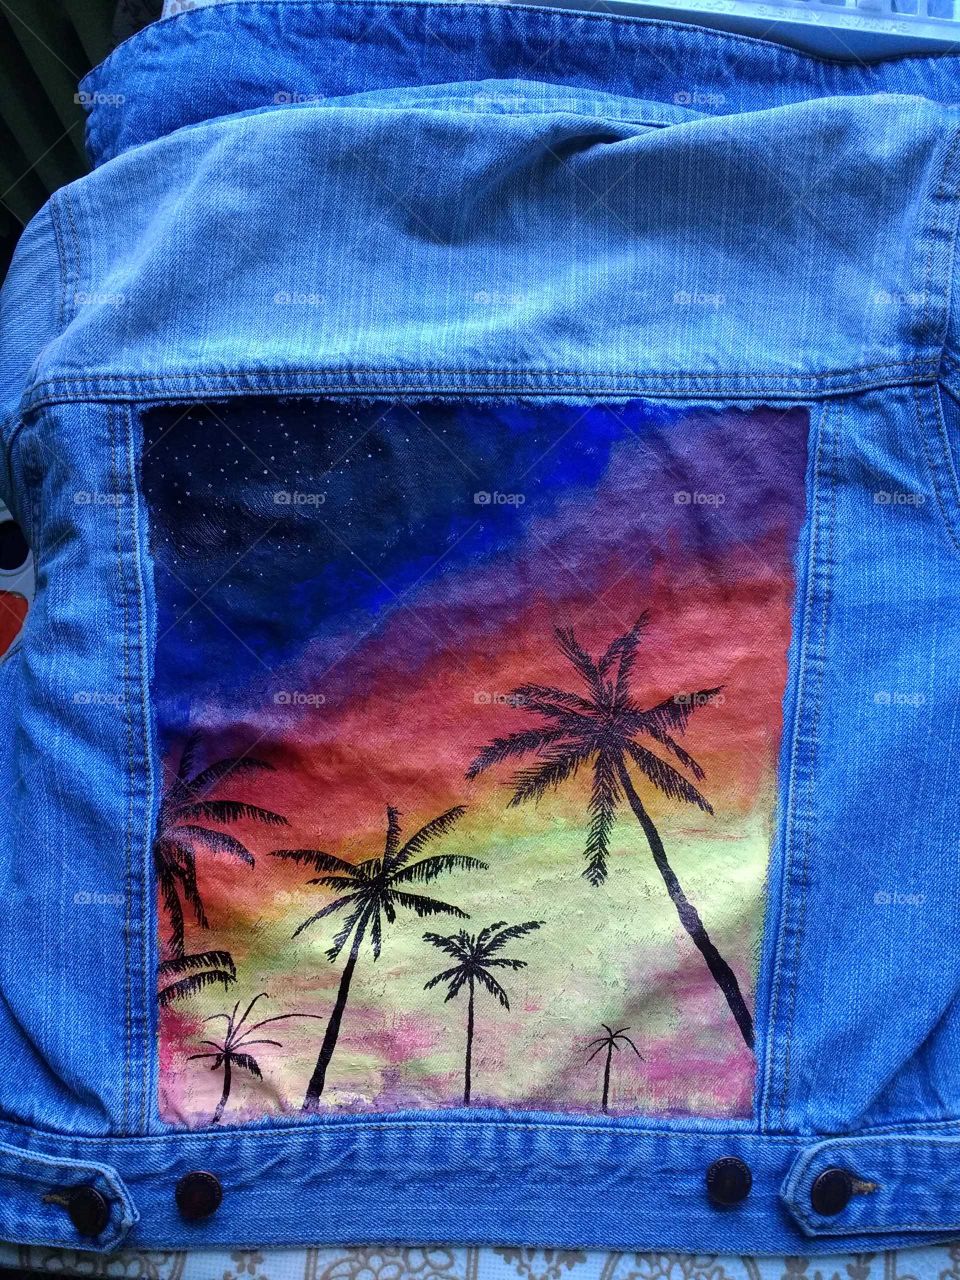 Painting on jeans jacket